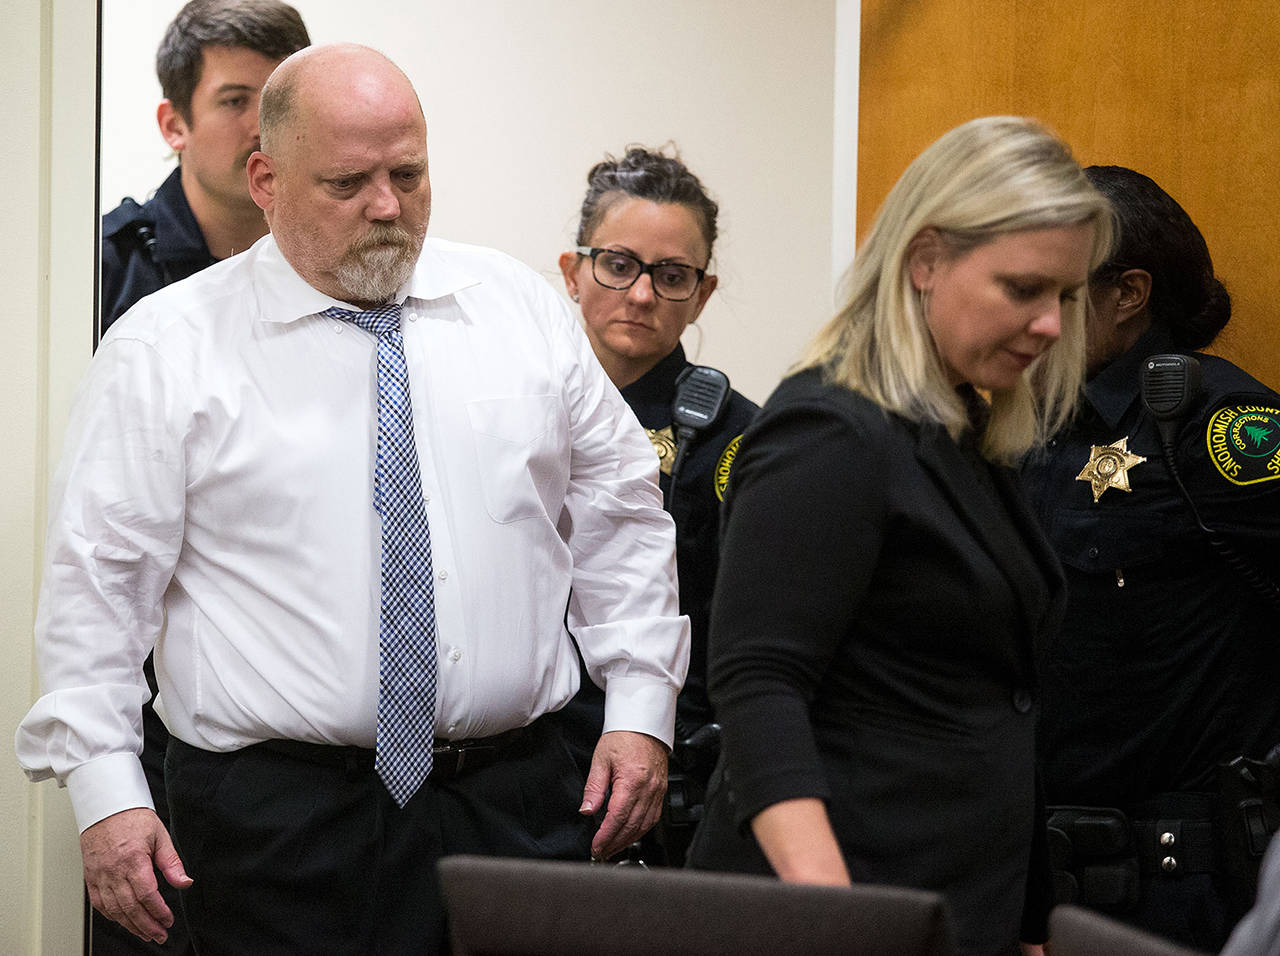 William Earl Talbott II enters Snohomsih County Superior Court with defense attorney Rachel Forde on June 19, 2018 in Everett. (Andy Bronson / Herald file)